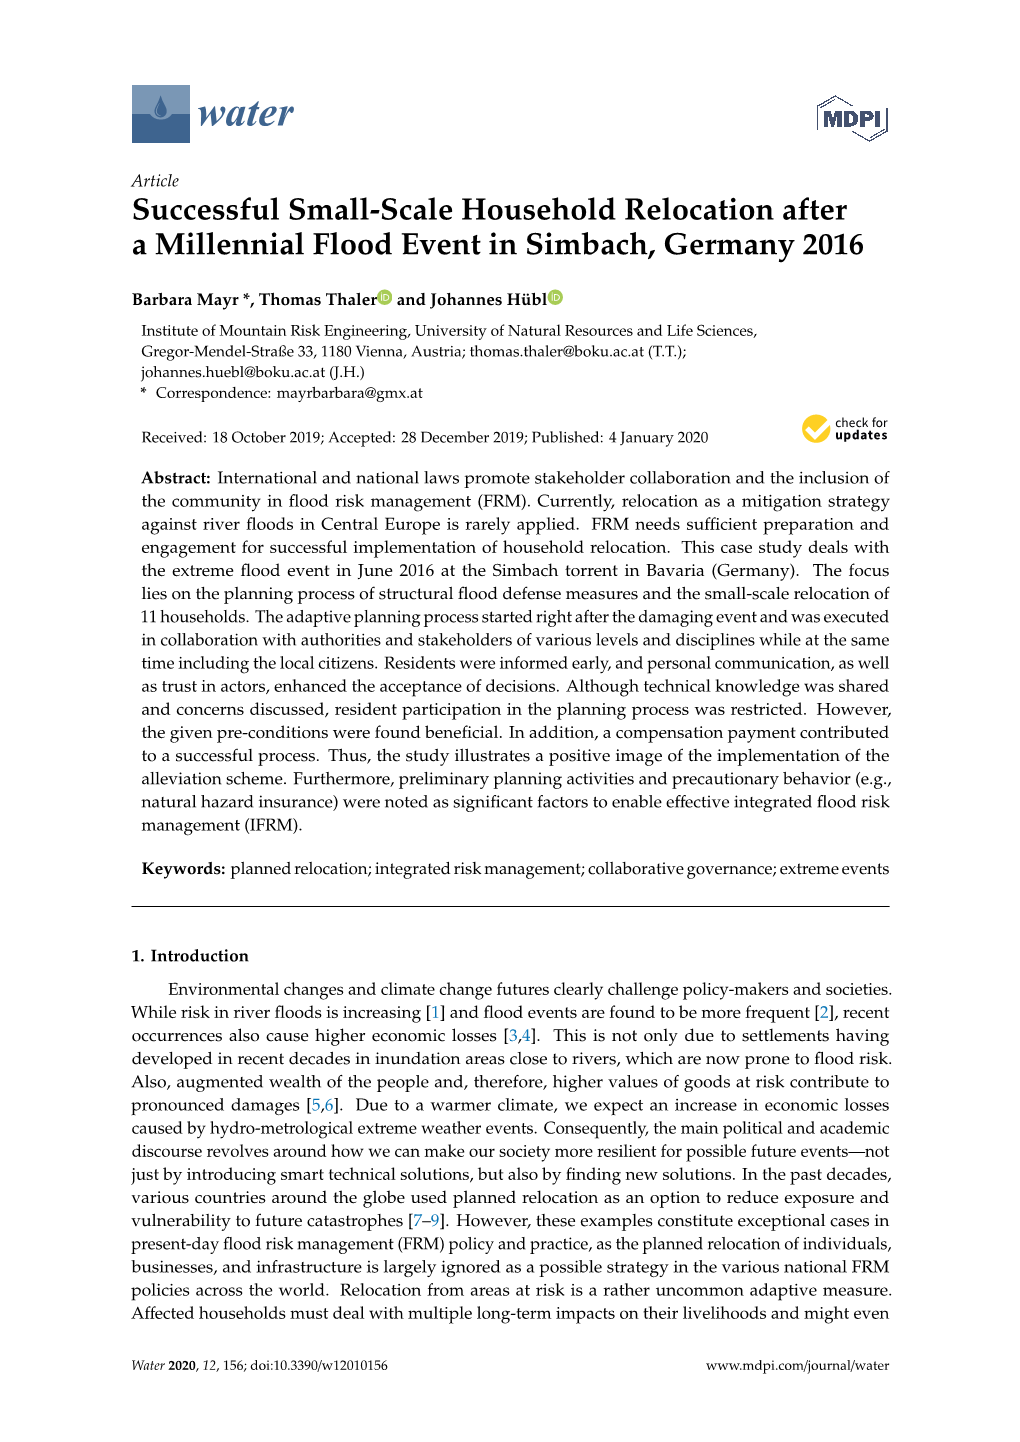 Successful Small-Scale Household Relocation After a Millennial Flood Event in Simbach, Germany 2016